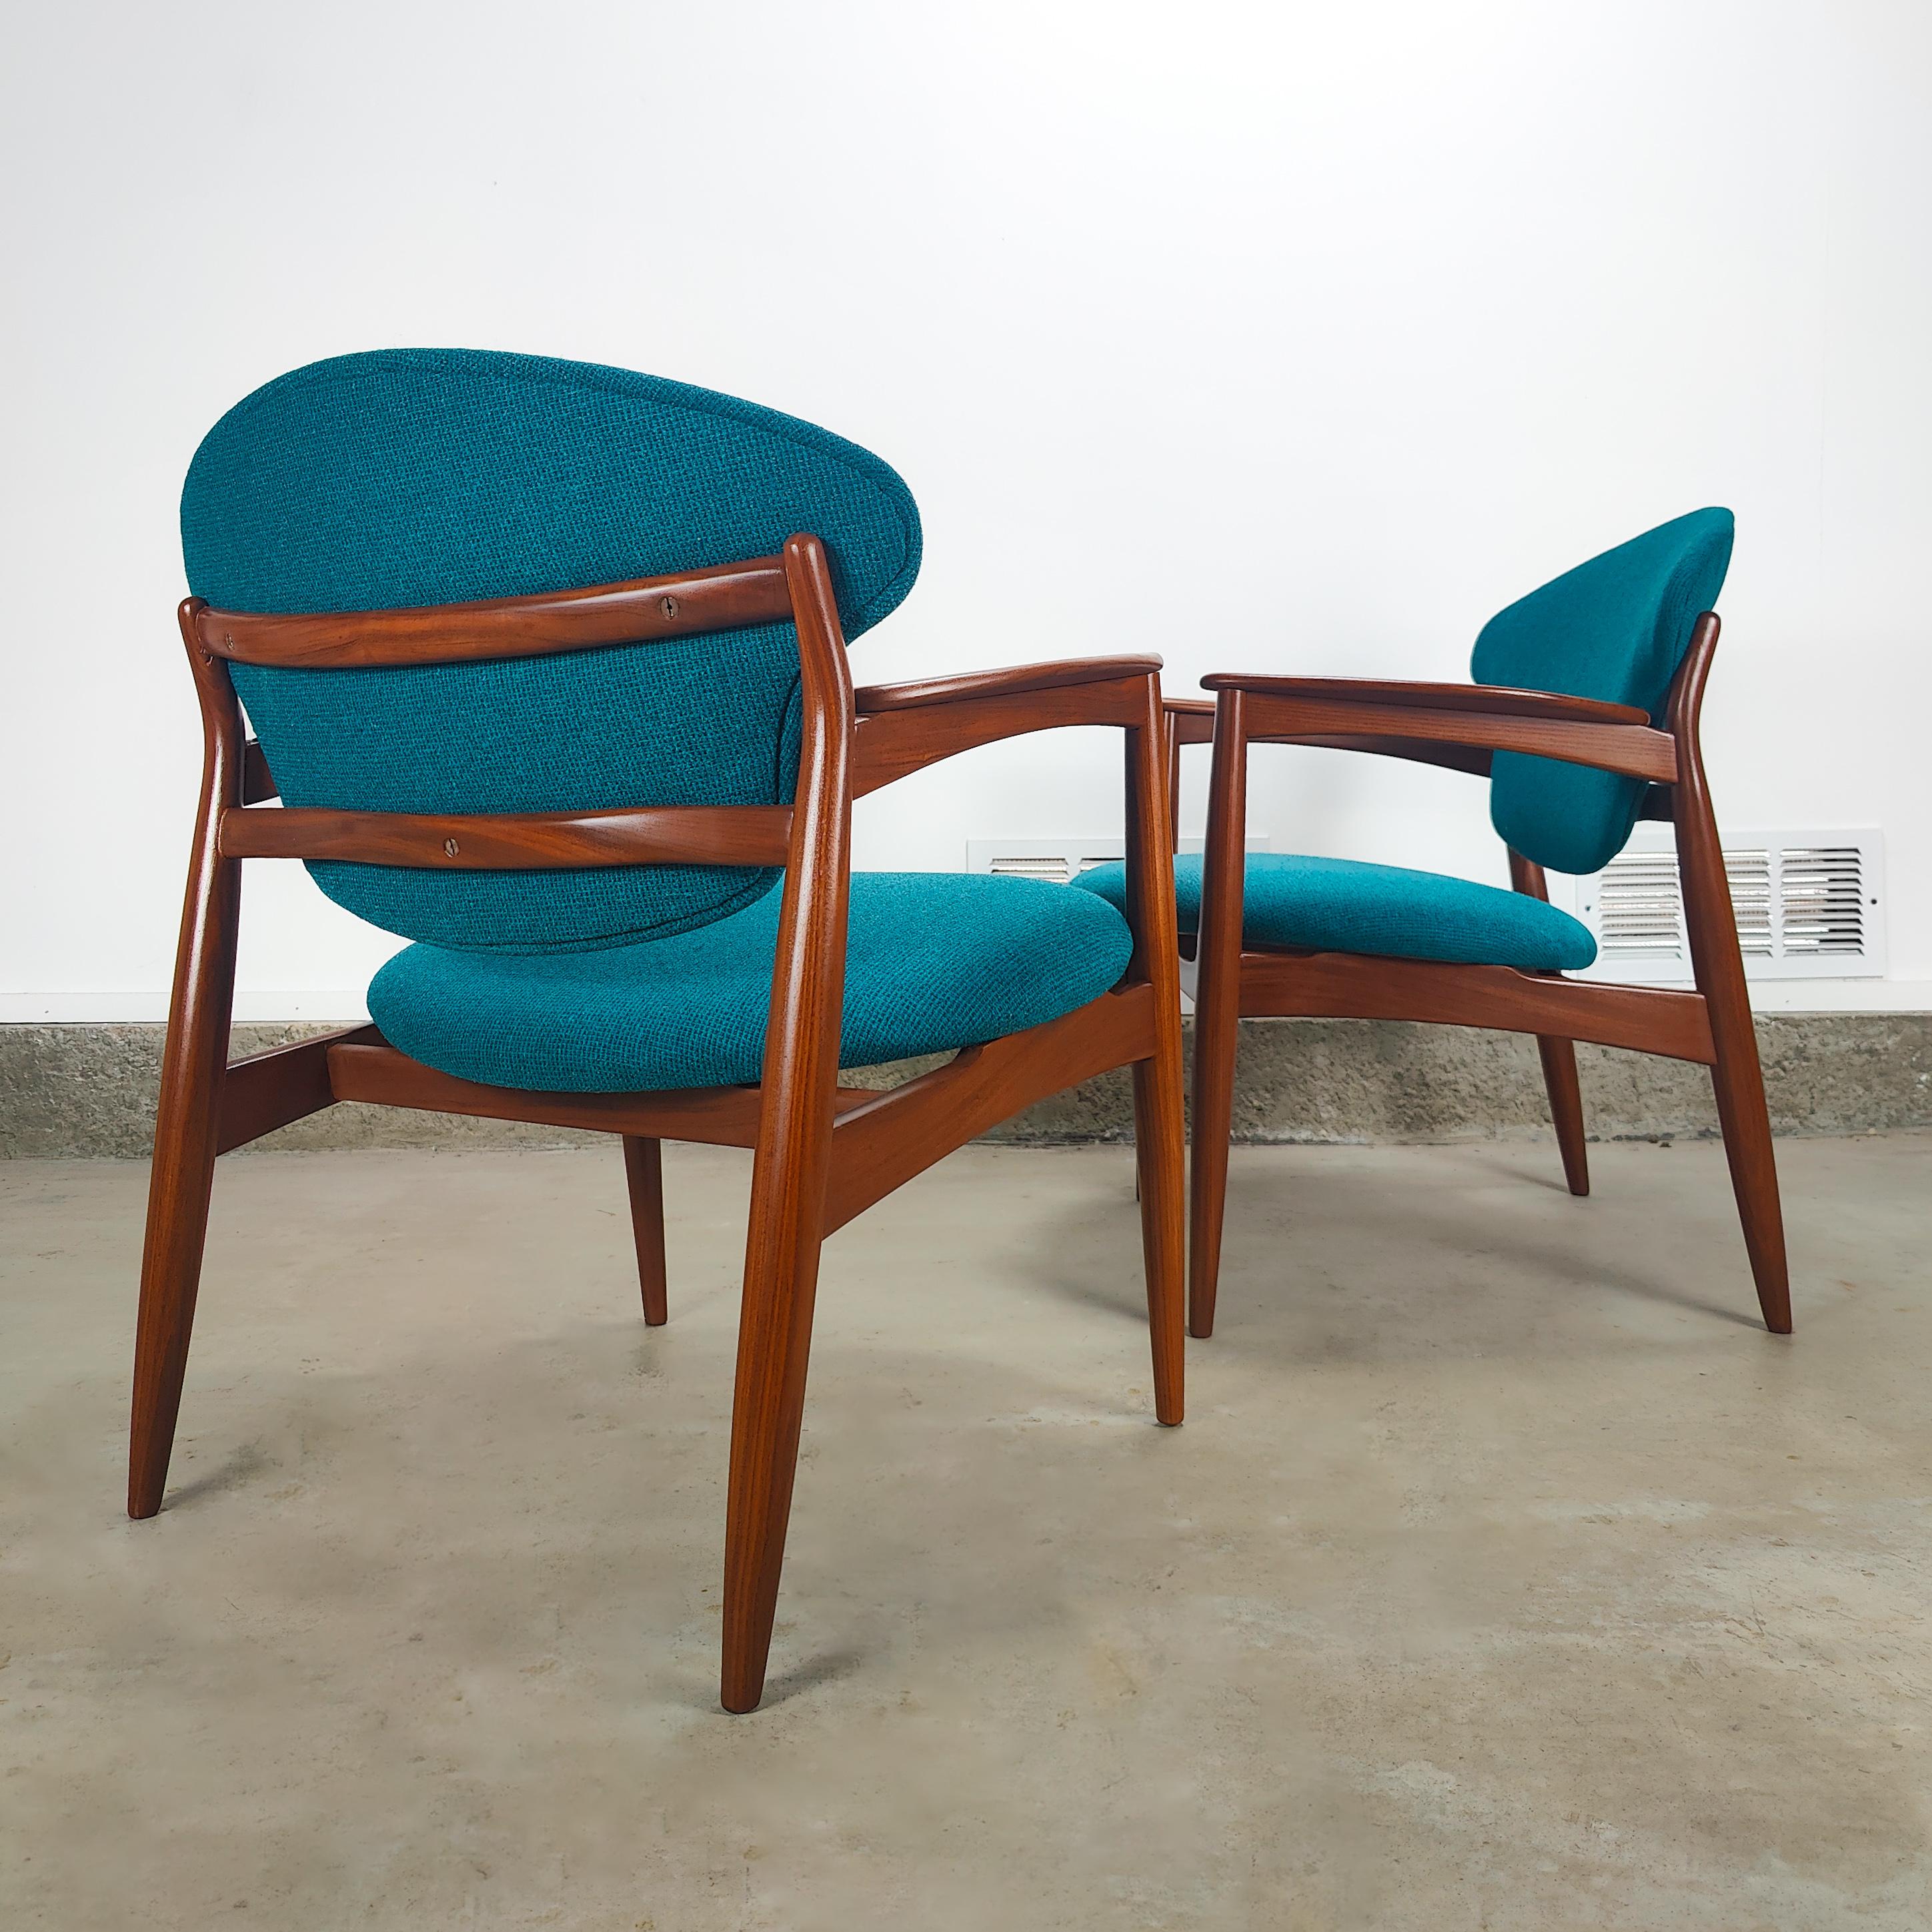 Just in, a stunning matching pair of accent/armchairs by L.K. Hjelle. They both feature curvaceous arms with simple clean lines throughout. Solid teak build very sturdy. 

Condition: Both have received a wood refinish that included sanding &